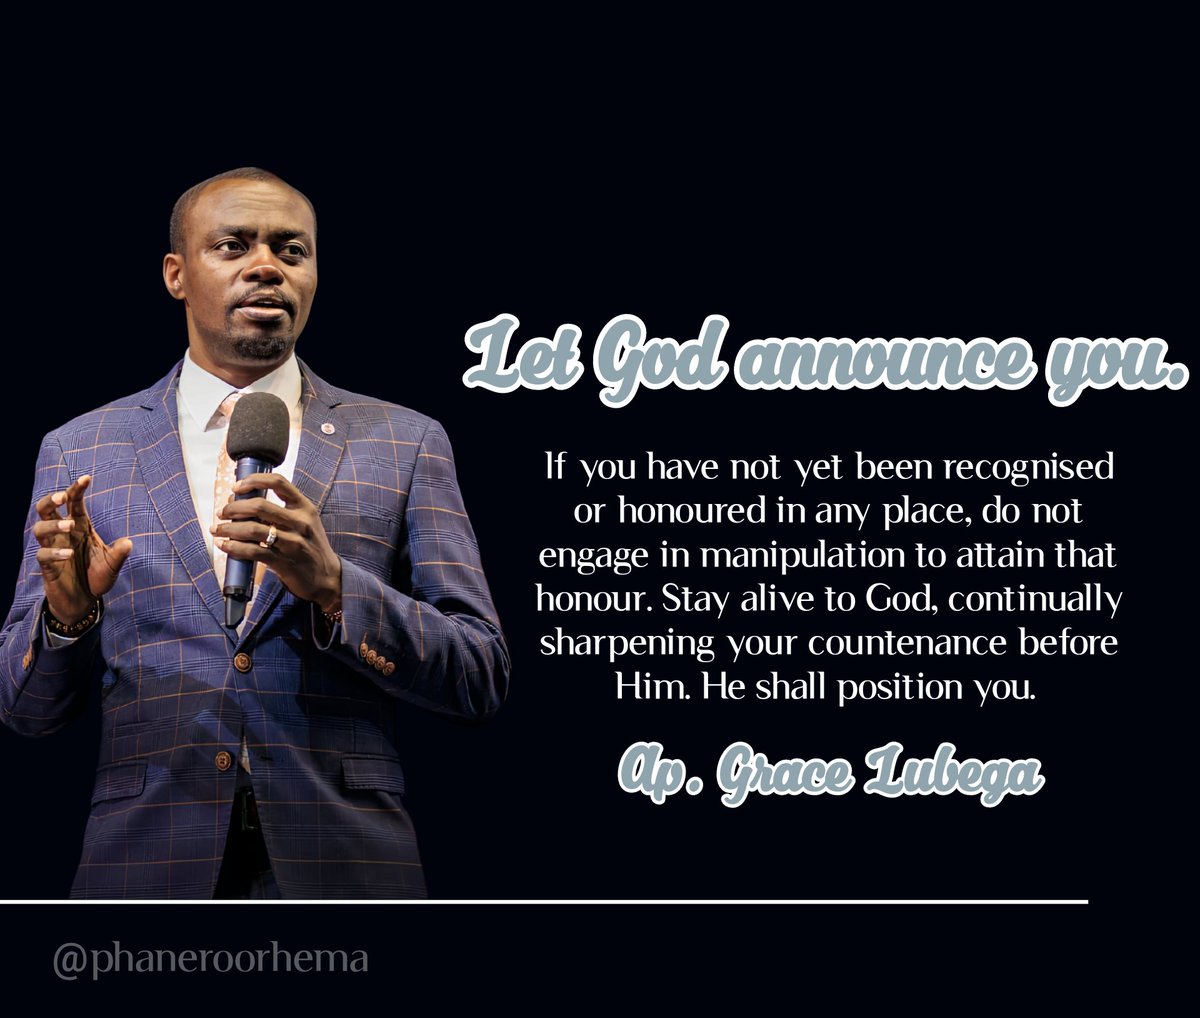 Let God announce you. If you have not yet been recognised or honoured in any place, do not engage in manipulation to attain that honour. Stay alive to God, continually sharpening your countenance before Him. He shall position you. 

Ap. Grace Lubega 
#PhanerooRhema
#MenGatherVII